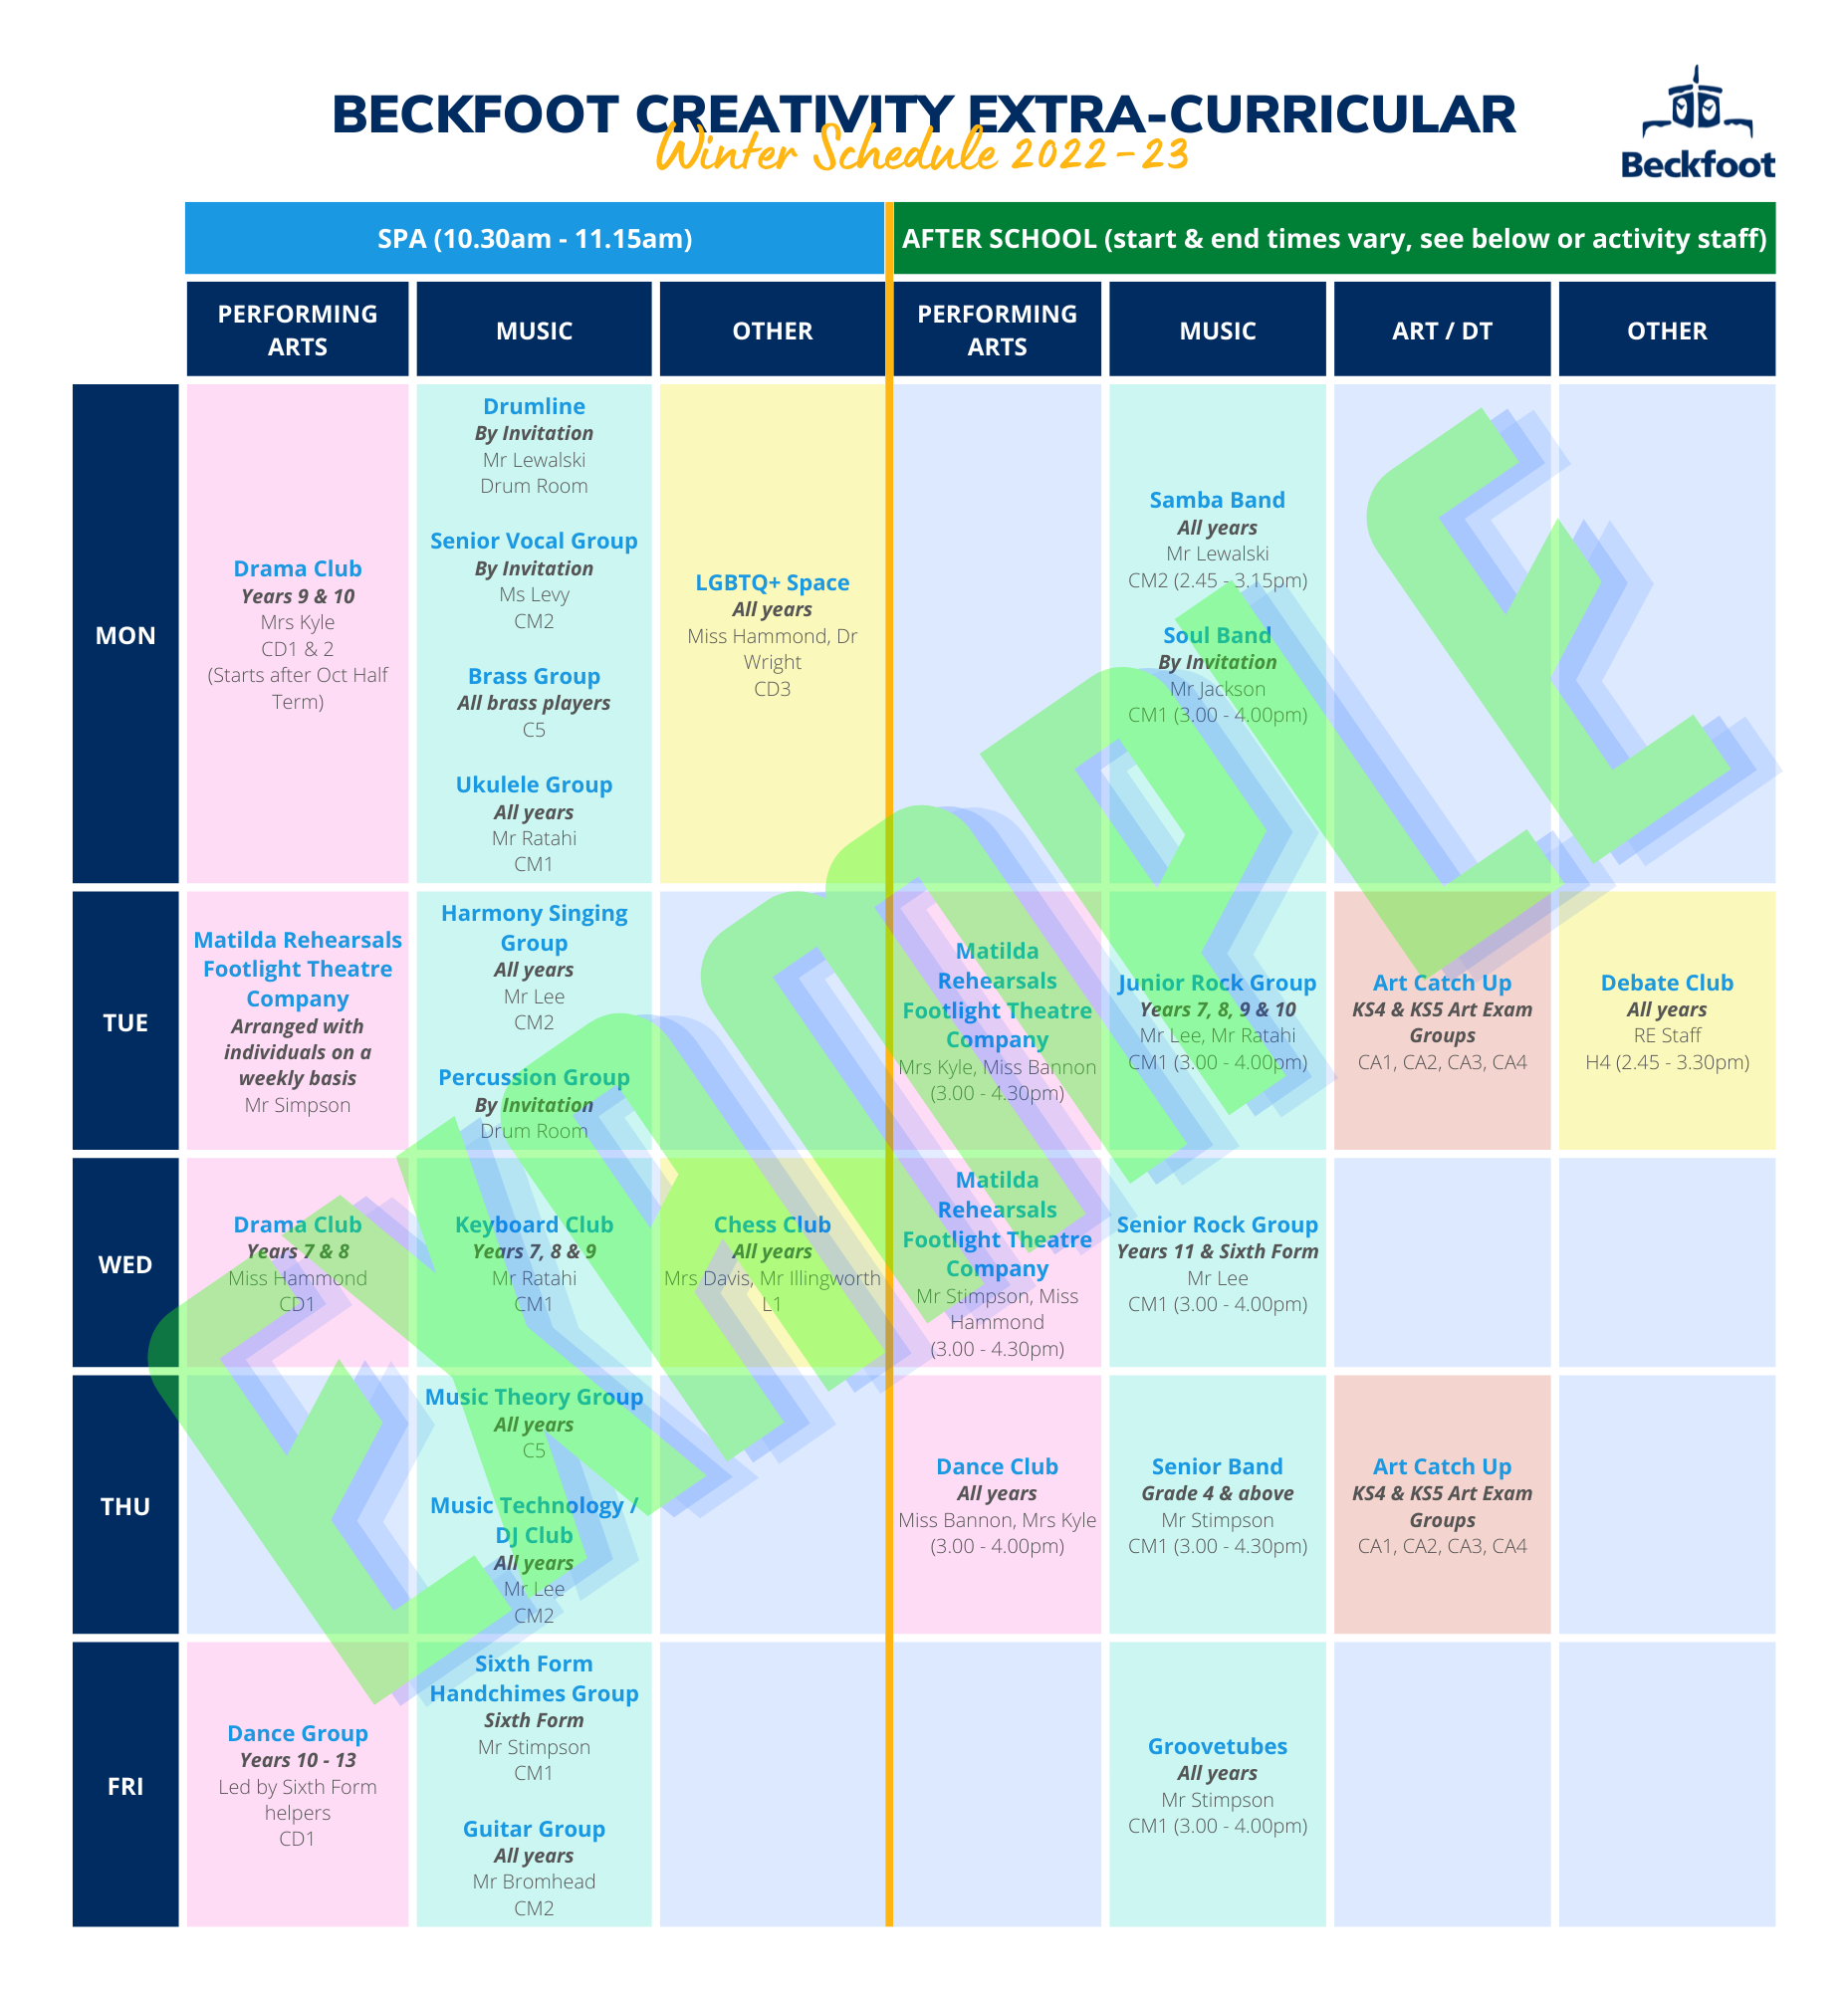 Extra Curricular Activity Creativity Timetable - Winter Schedule